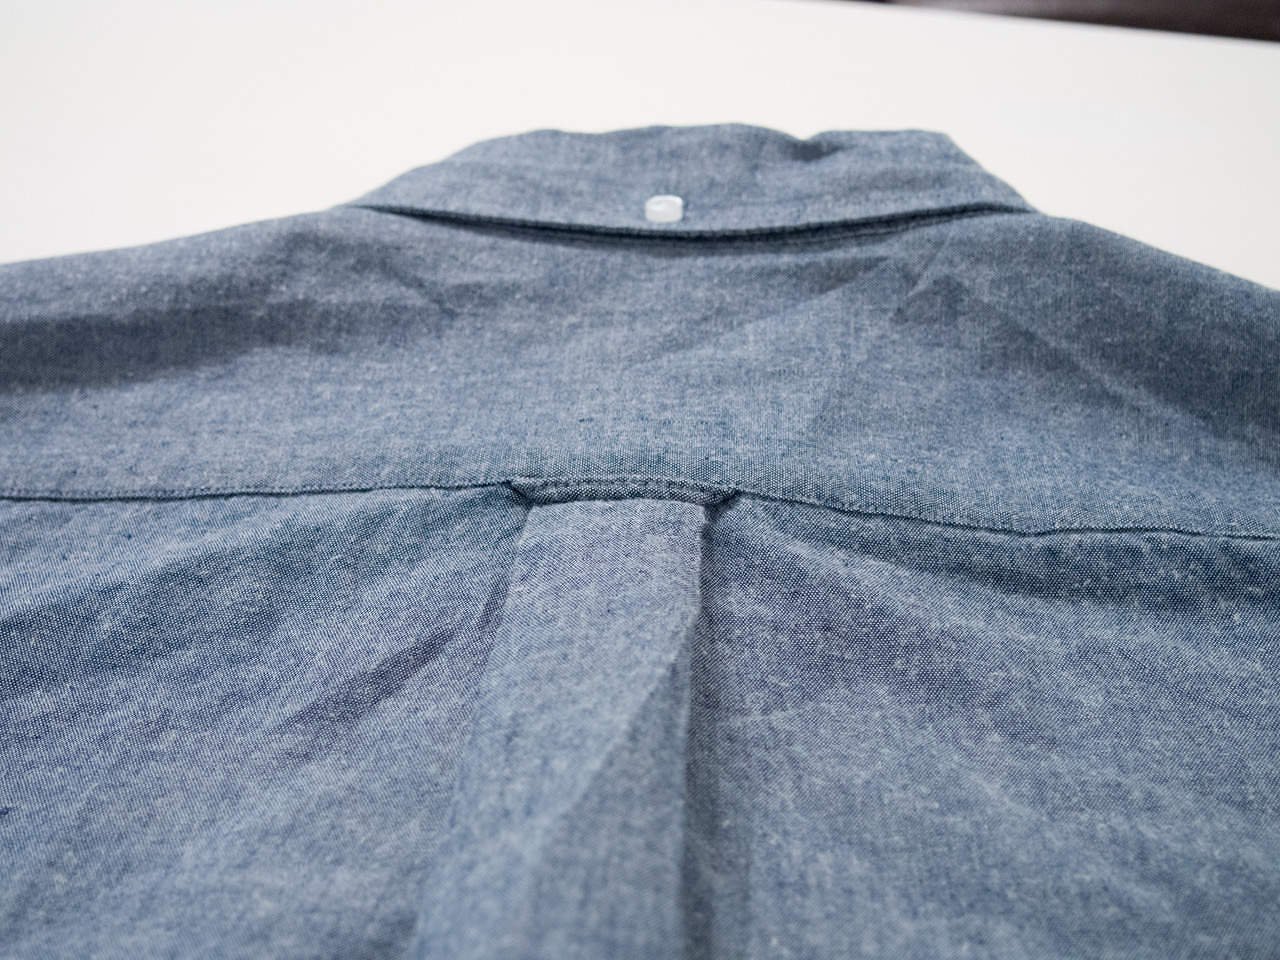 Ever Noticed The Small Loop At The Back Of Your Shirt? It’s Not For ...